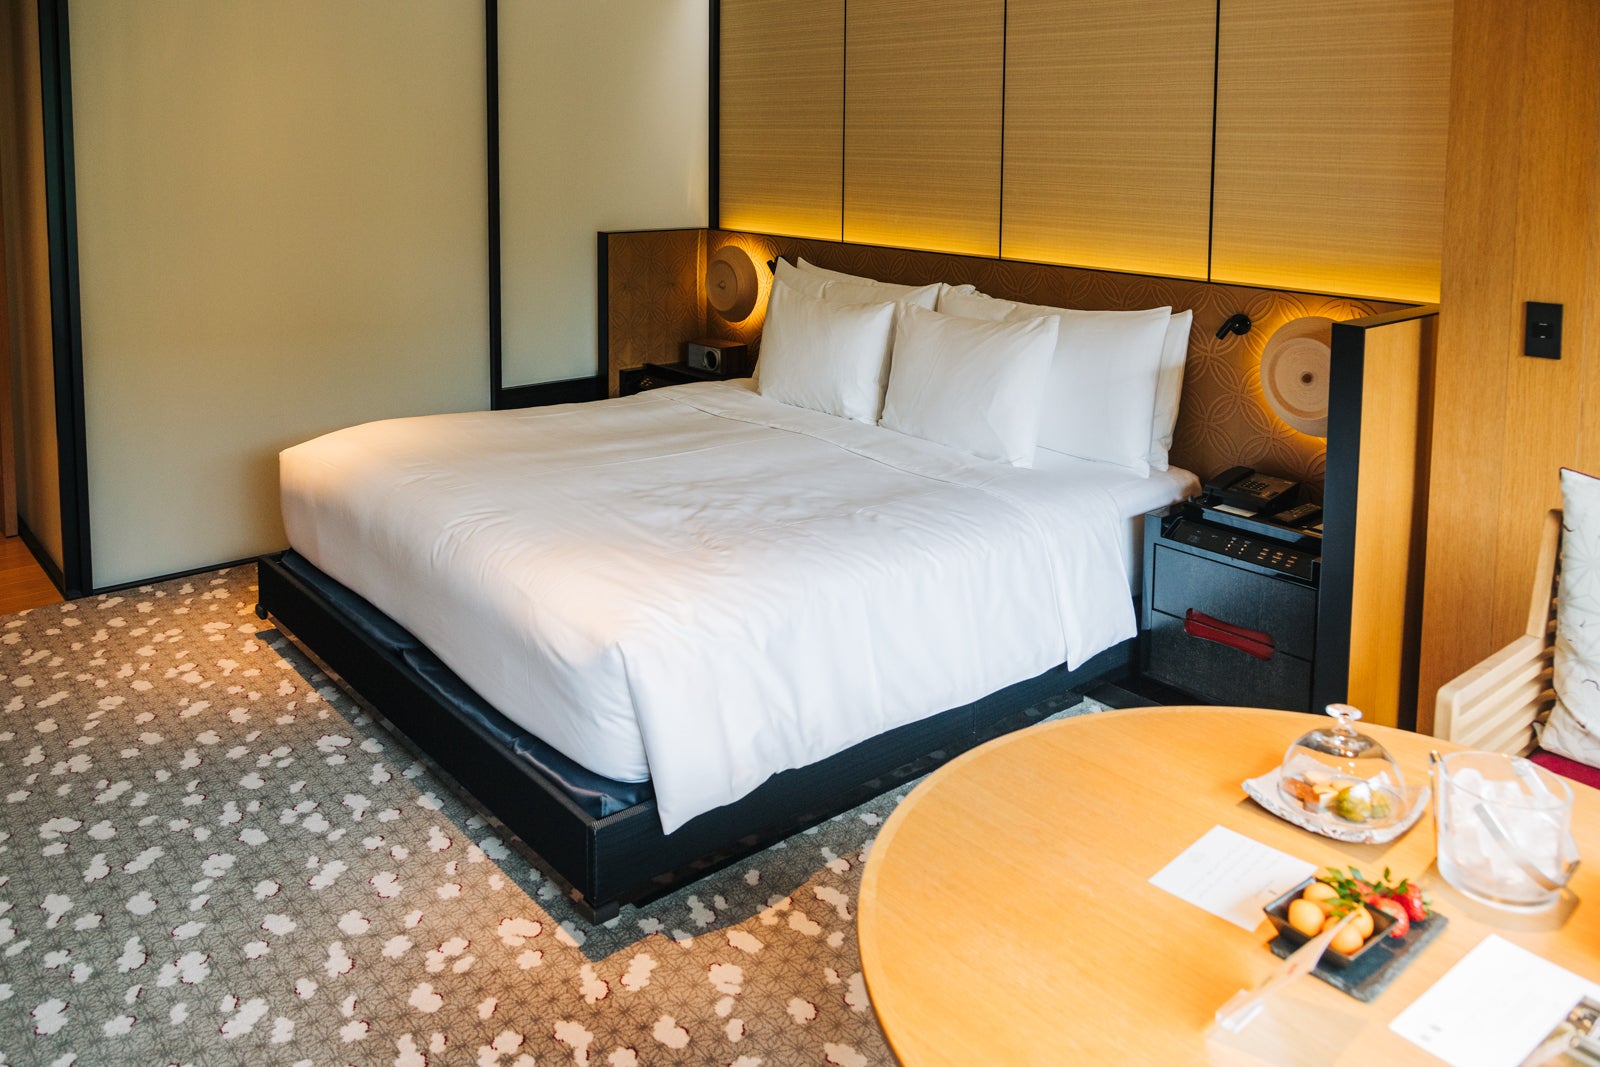 King-size bed in garden-view room at The Ritz-Carlton, Kyoto